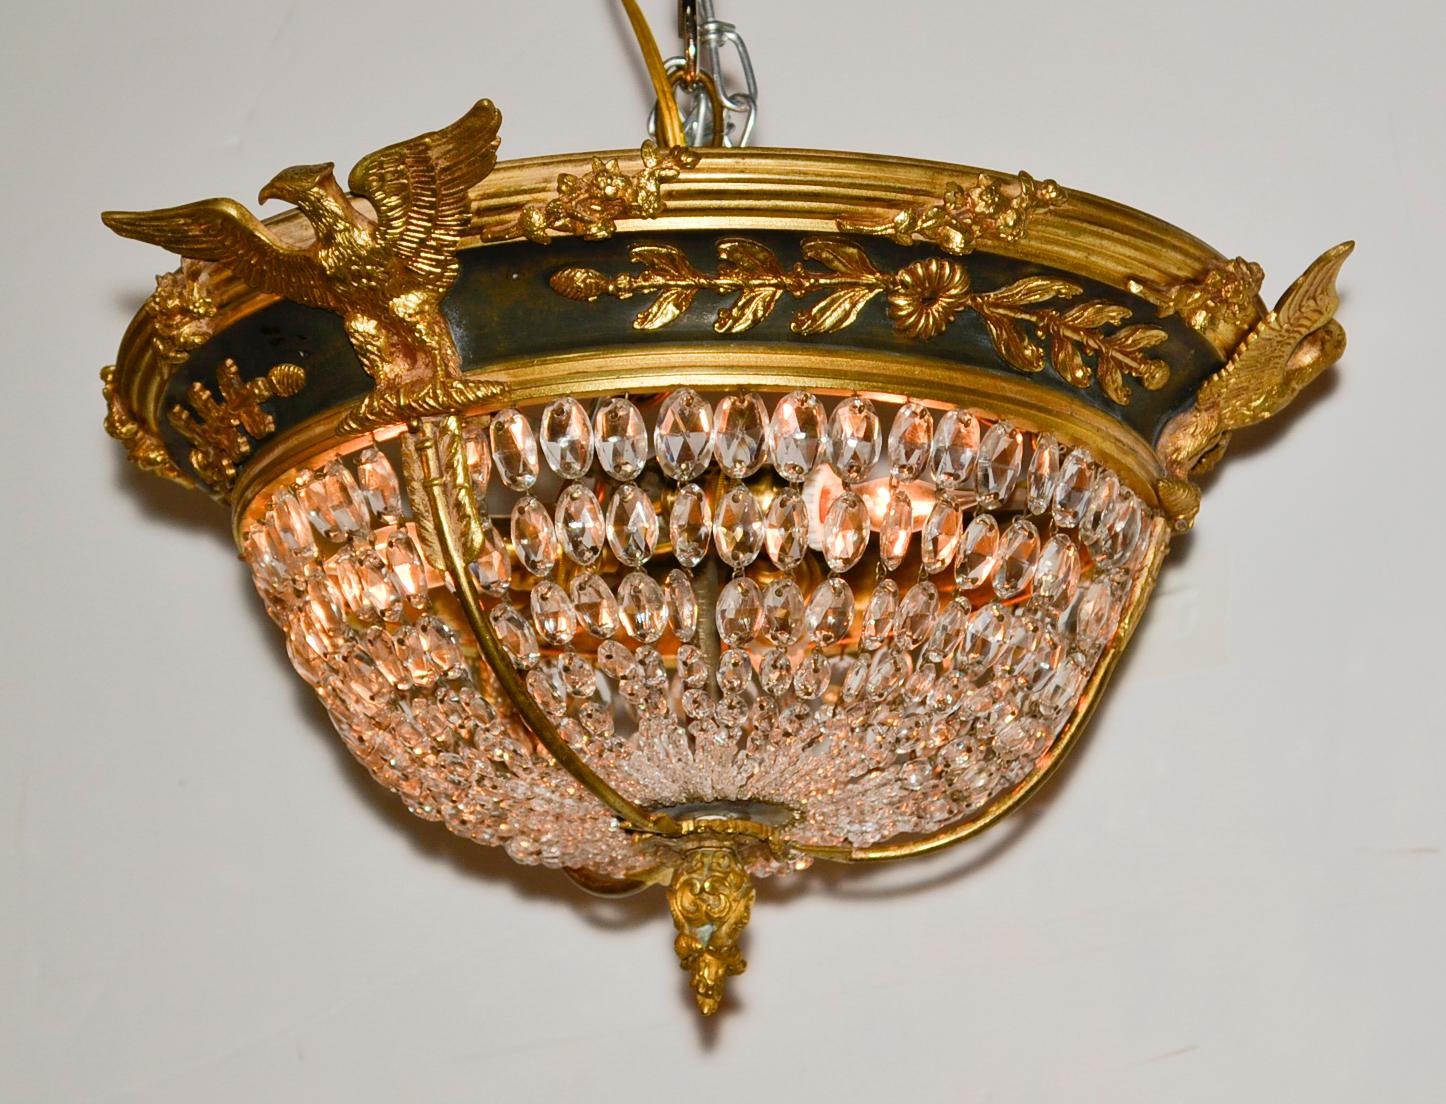 Gilt 19th Century French Empire Ceiling Fixture